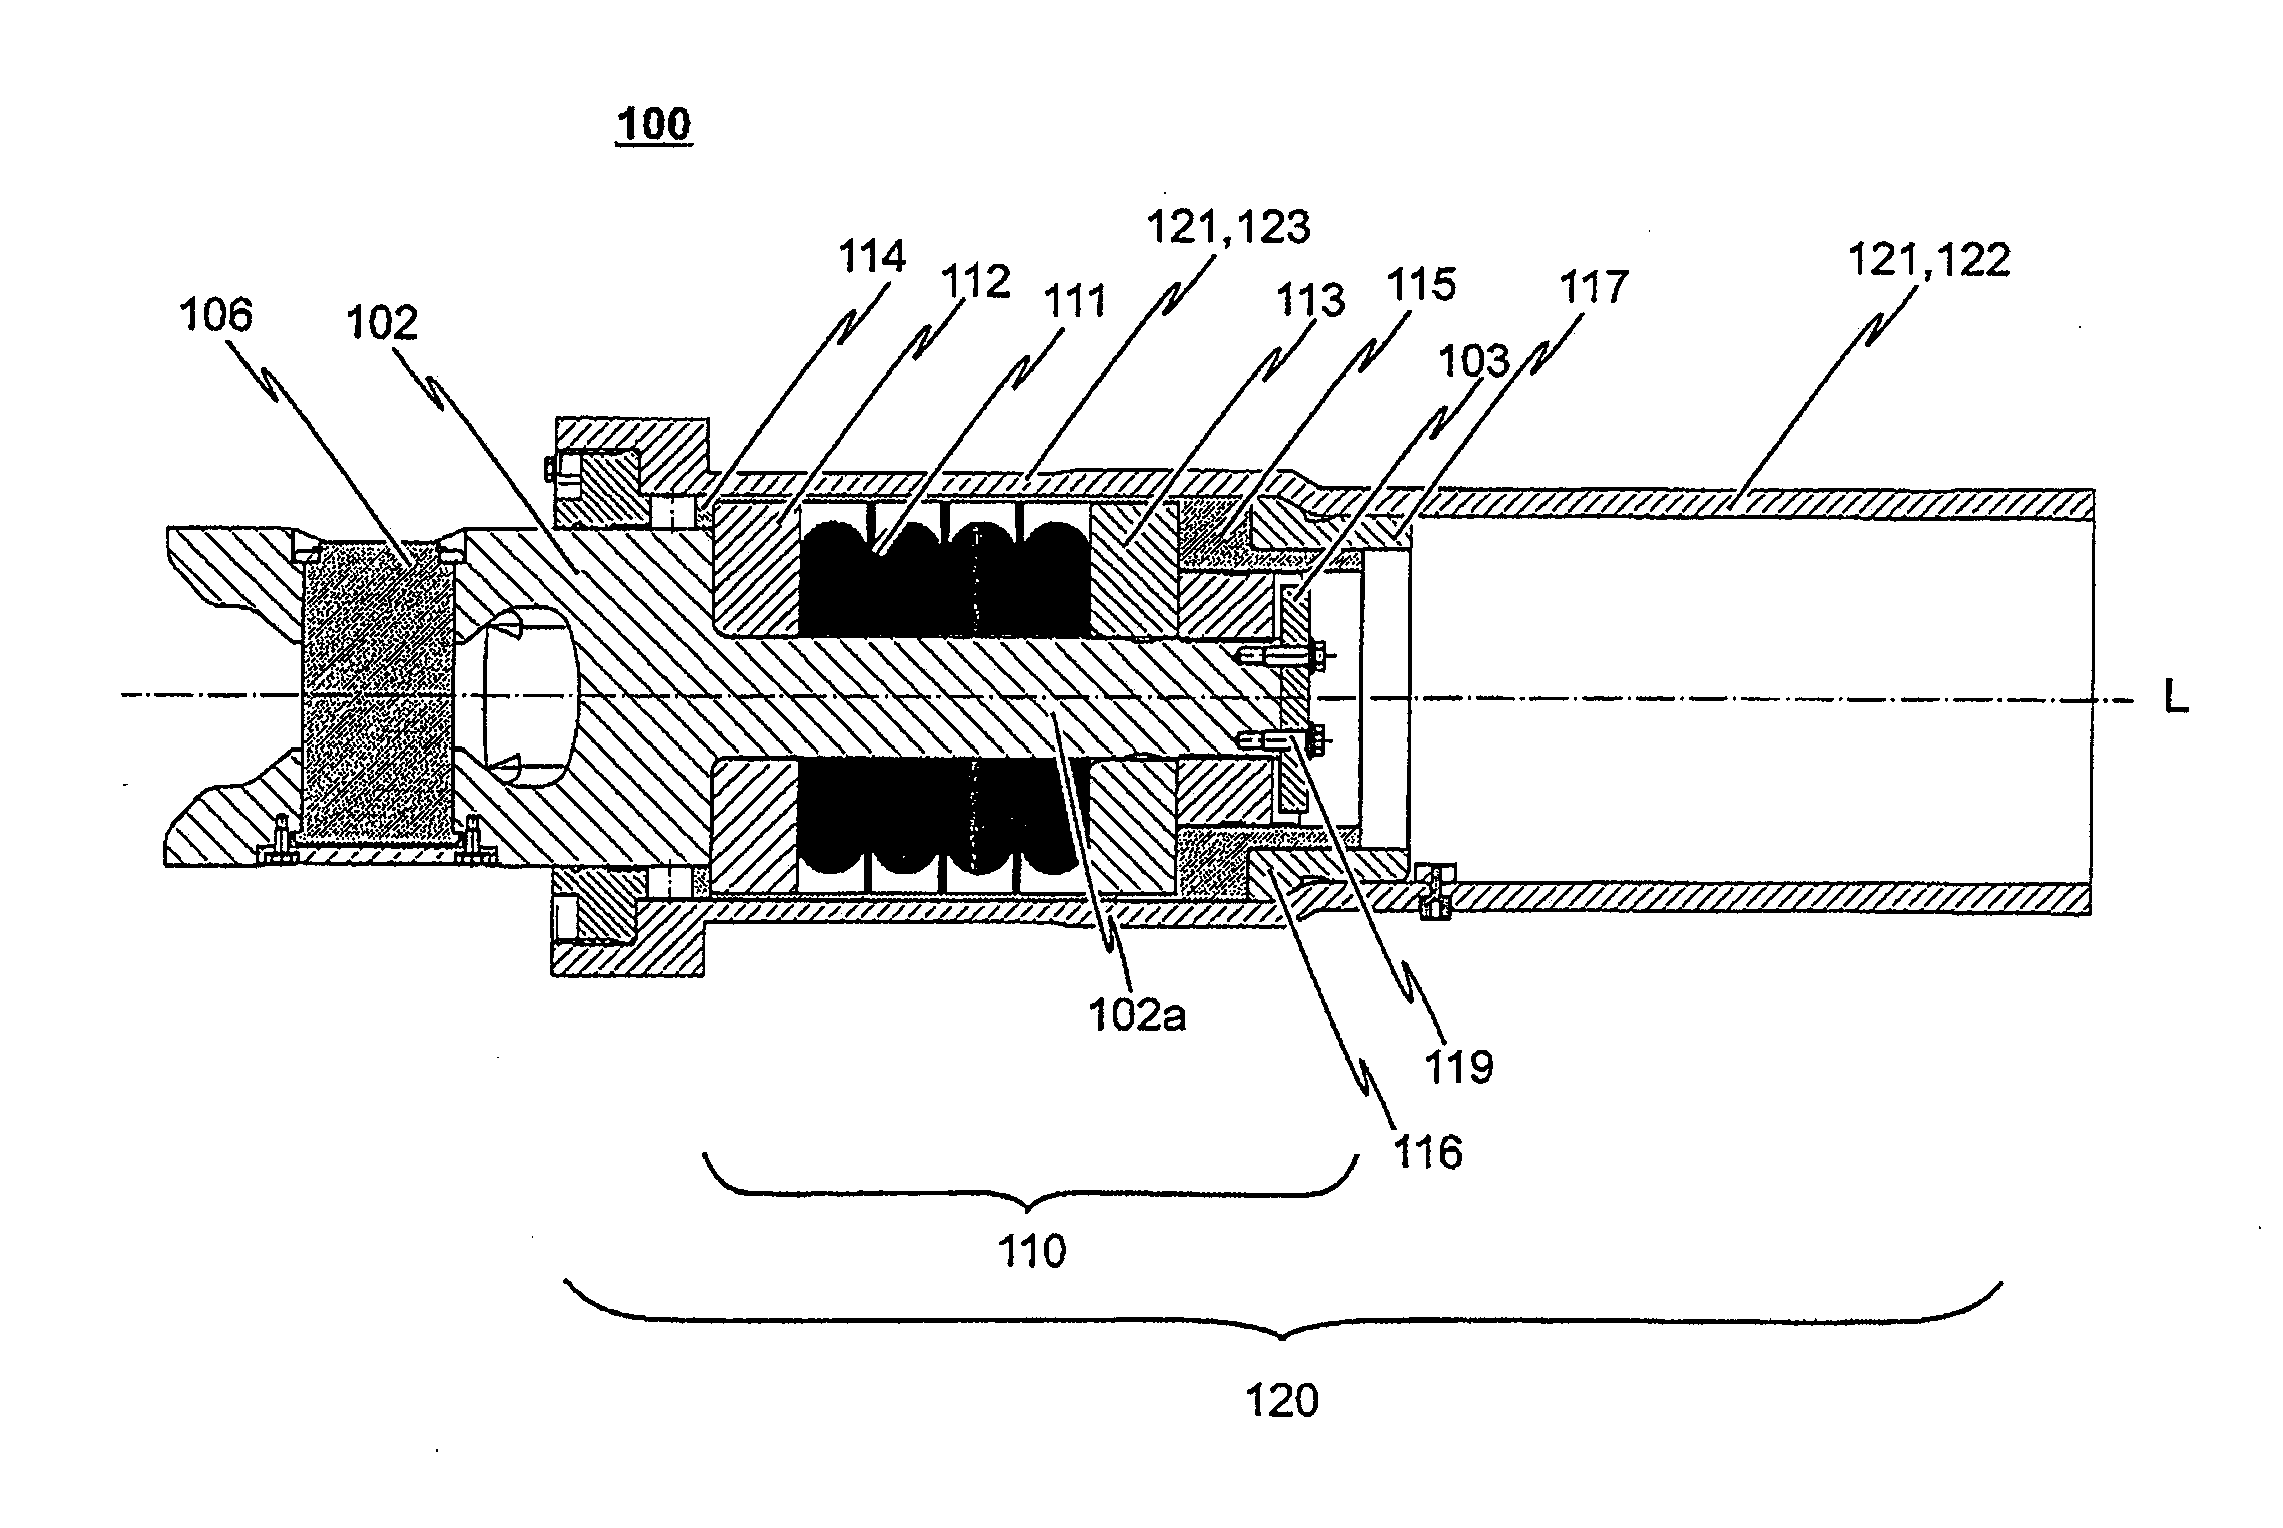 Energy-Absorbing Device Particularly For A Shock Absorber For A Track-Guided Vehicle